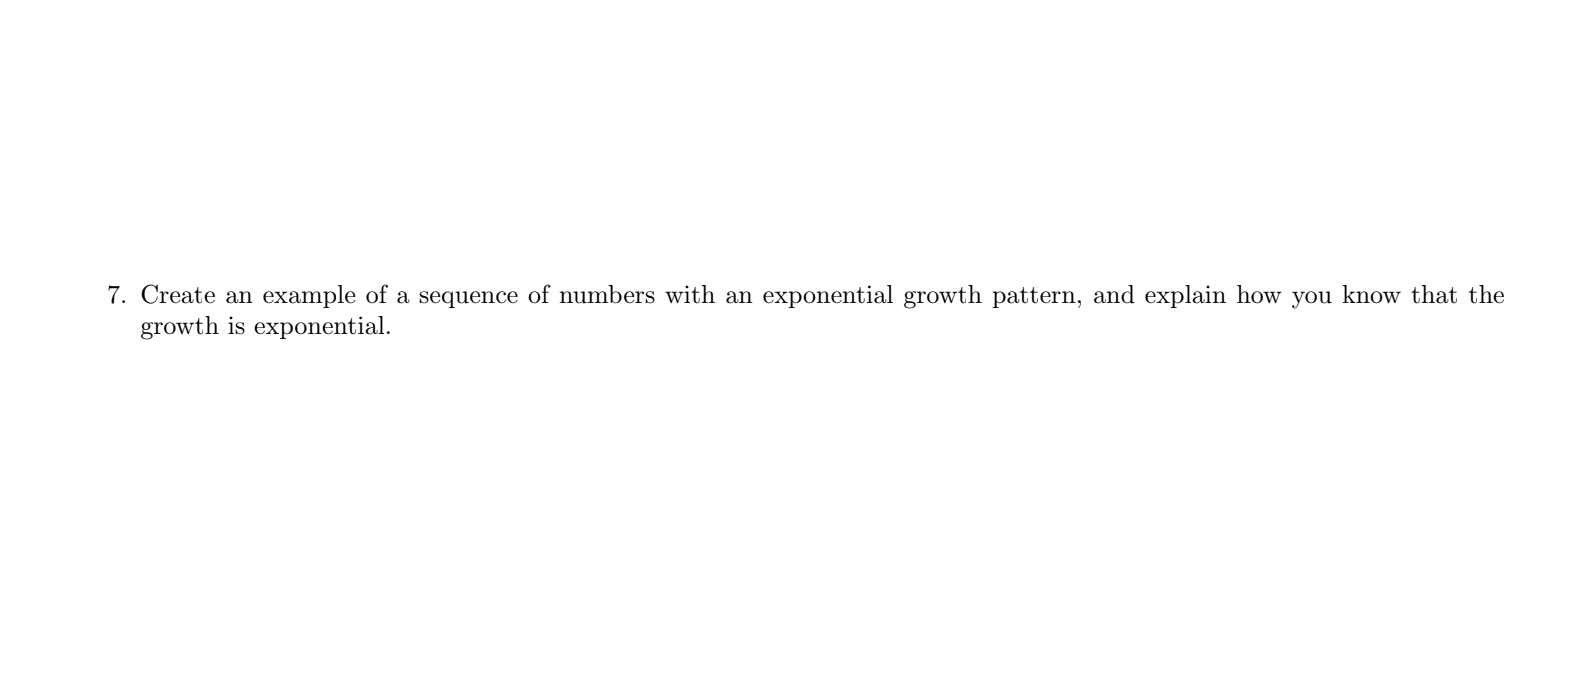 7. Create an example of a sequence of numbers with an exponential growth pattern, and explain how you know that the
growth is exponential.
